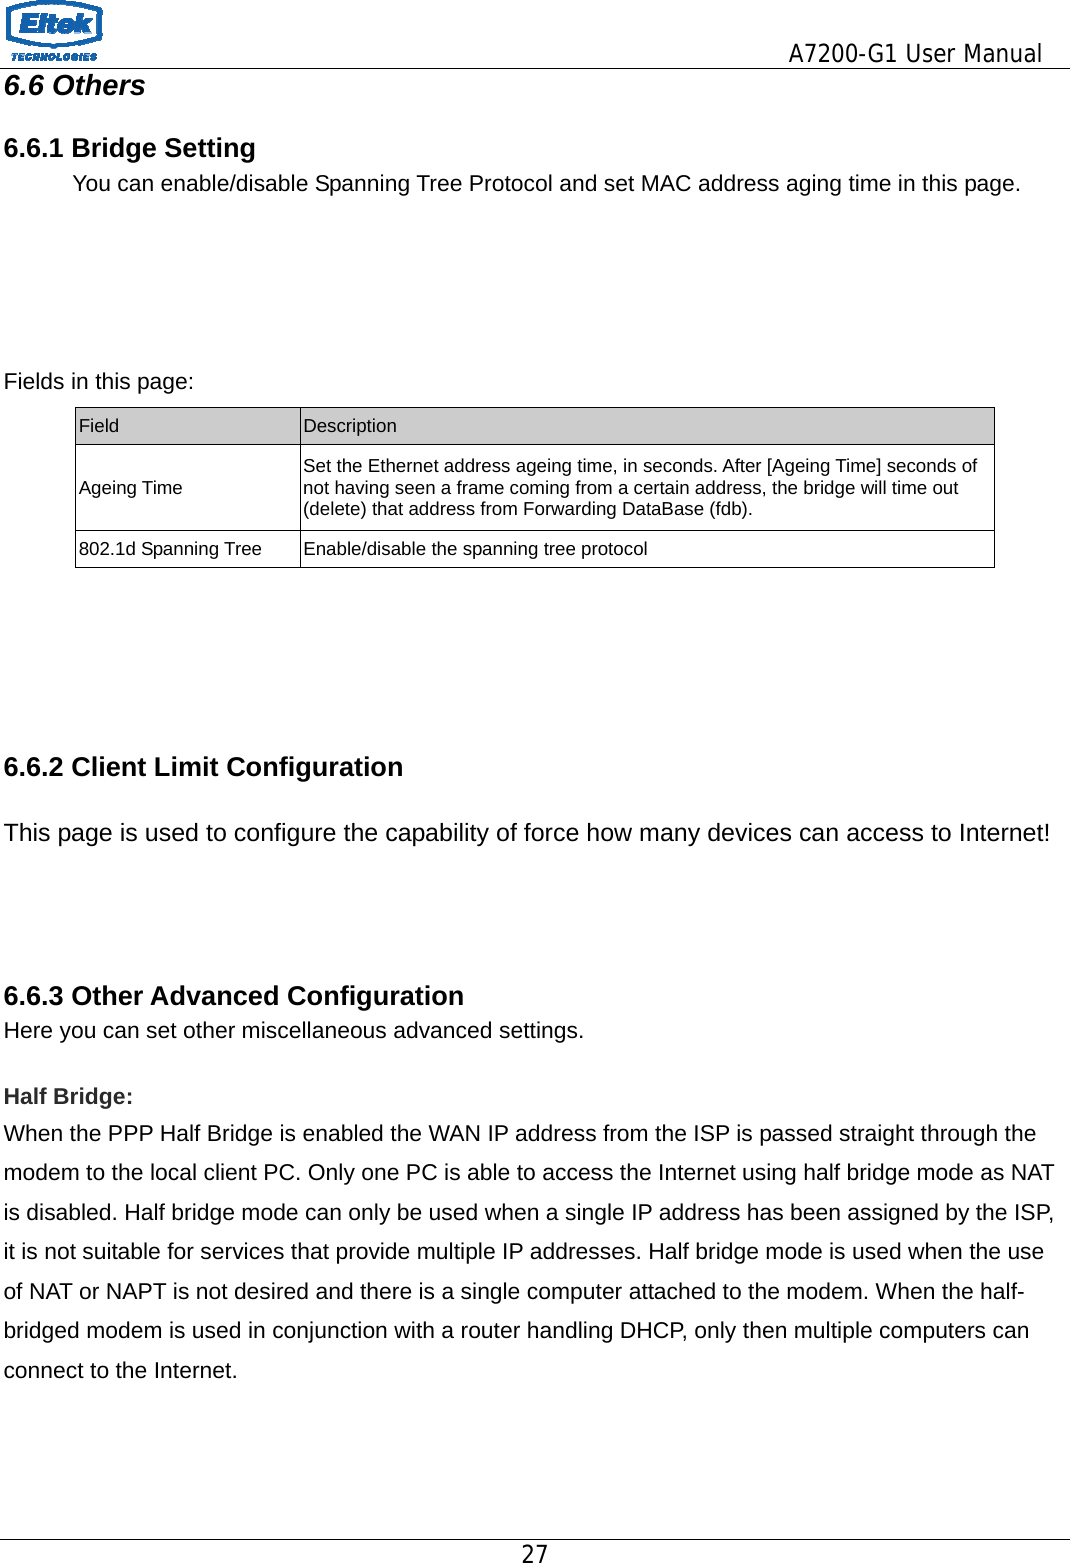                                         A7200-G1 User Manual 27  6.6 Others 6.6.1 Bridge Setting             You can enable/disable Spanning Tree Protocol and set MAC address aging time in this page.     Fields in this page: Field  Description Ageing Time  Set the Ethernet address ageing time, in seconds. After [Ageing Time] seconds of not having seen a frame coming from a certain address, the bridge will time out (delete) that address from Forwarding DataBase (fdb). 802.1d Spanning Tree  Enable/disable the spanning tree protocol     6.6.2 Client Limit Configuration  This page is used to configure the capability of force how many devices can access to Internet!    6.6.3 Other Advanced Configuration Here you can set other miscellaneous advanced settings.  Half Bridge:   When the PPP Half Bridge is enabled the WAN IP address from the ISP is passed straight through the modem to the local client PC. Only one PC is able to access the Internet using half bridge mode as NAT is disabled. Half bridge mode can only be used when a single IP address has been assigned by the ISP, it is not suitable for services that provide multiple IP addresses. Half bridge mode is used when the use of NAT or NAPT is not desired and there is a single computer attached to the modem. When the half-bridged modem is used in conjunction with a router handling DHCP, only then multiple computers can connect to the Internet.    